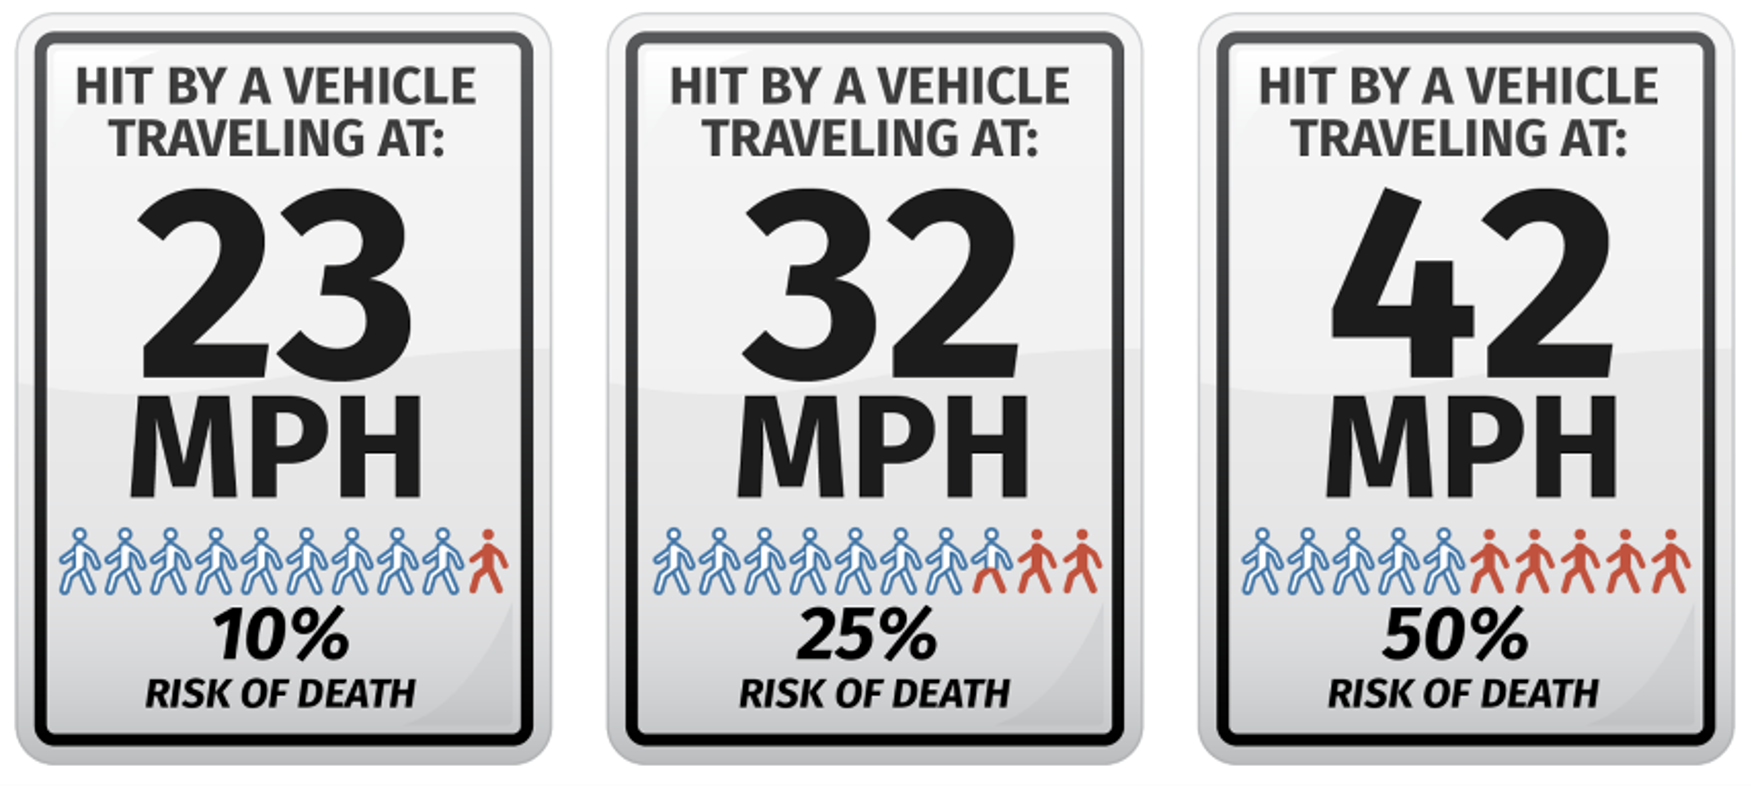 A graphic showing that crashes involving higher vehicle speeds carry a higher risk of death.